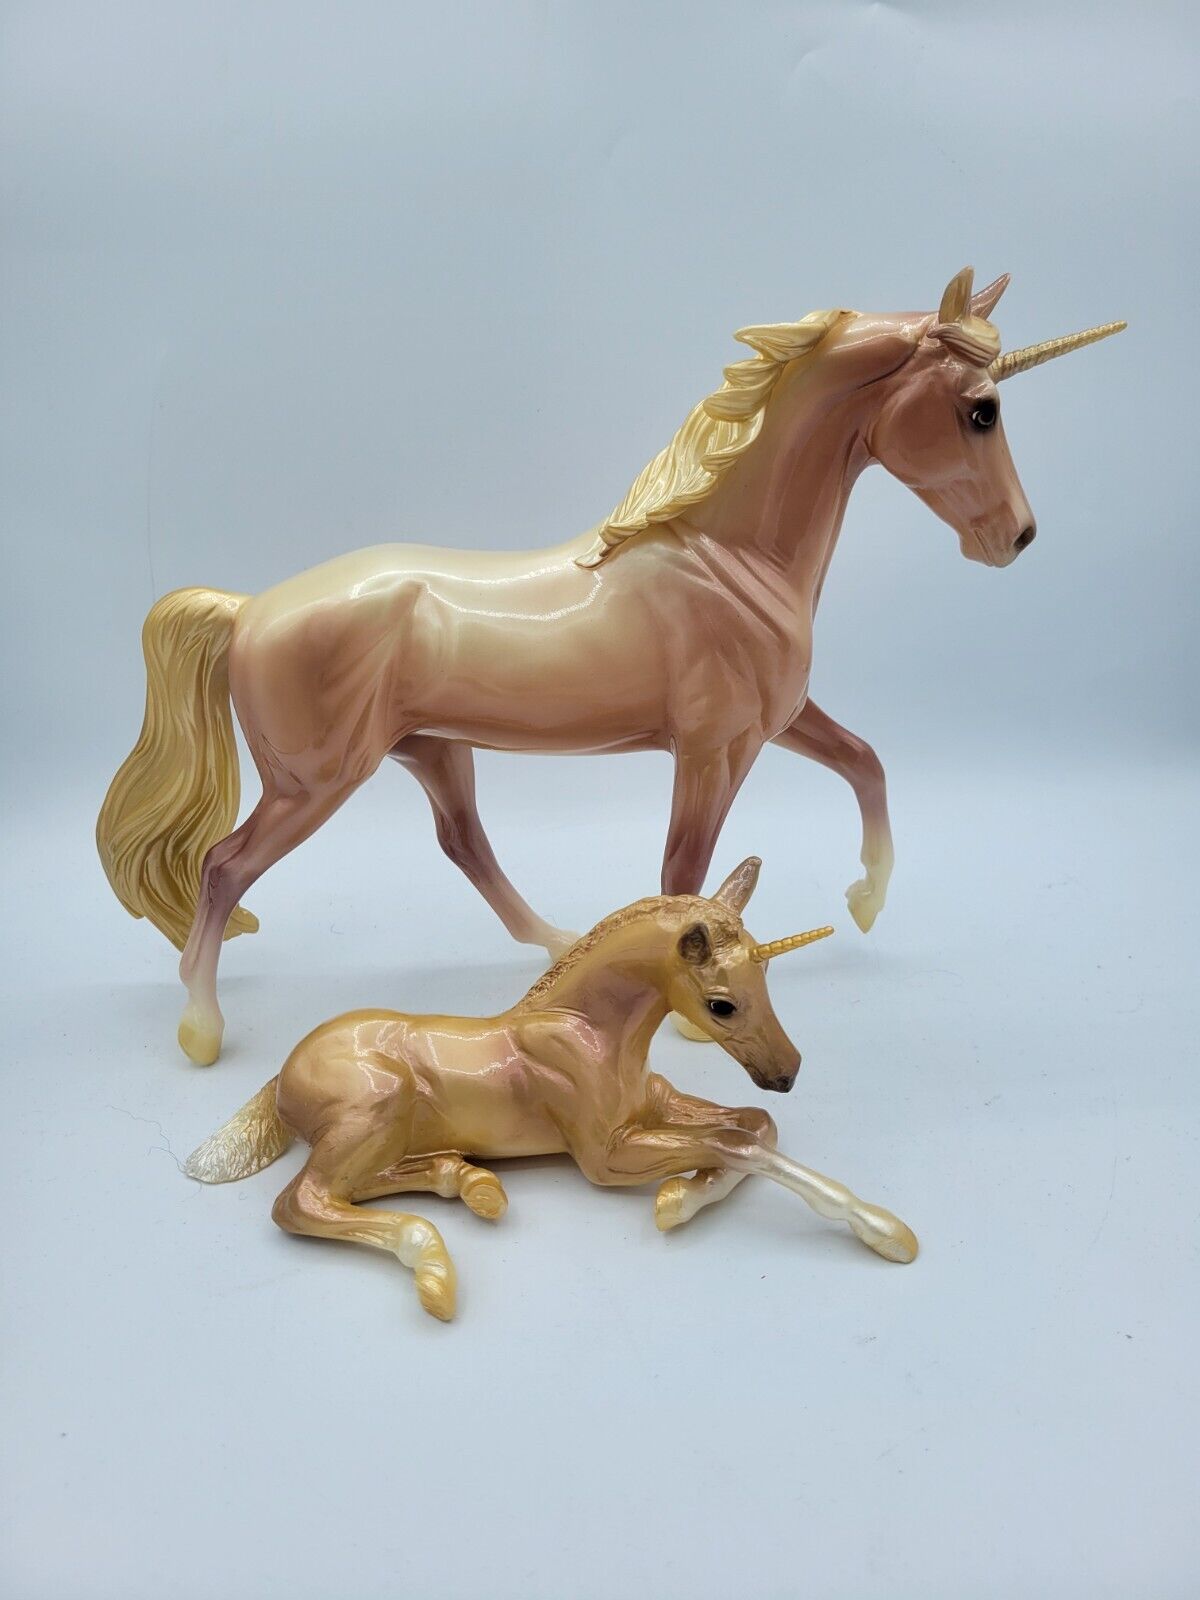 BREYER TRADITIONAL-Ceres & Minerva 2022 Limited Edition Mare & Foal Unicorns-NEW